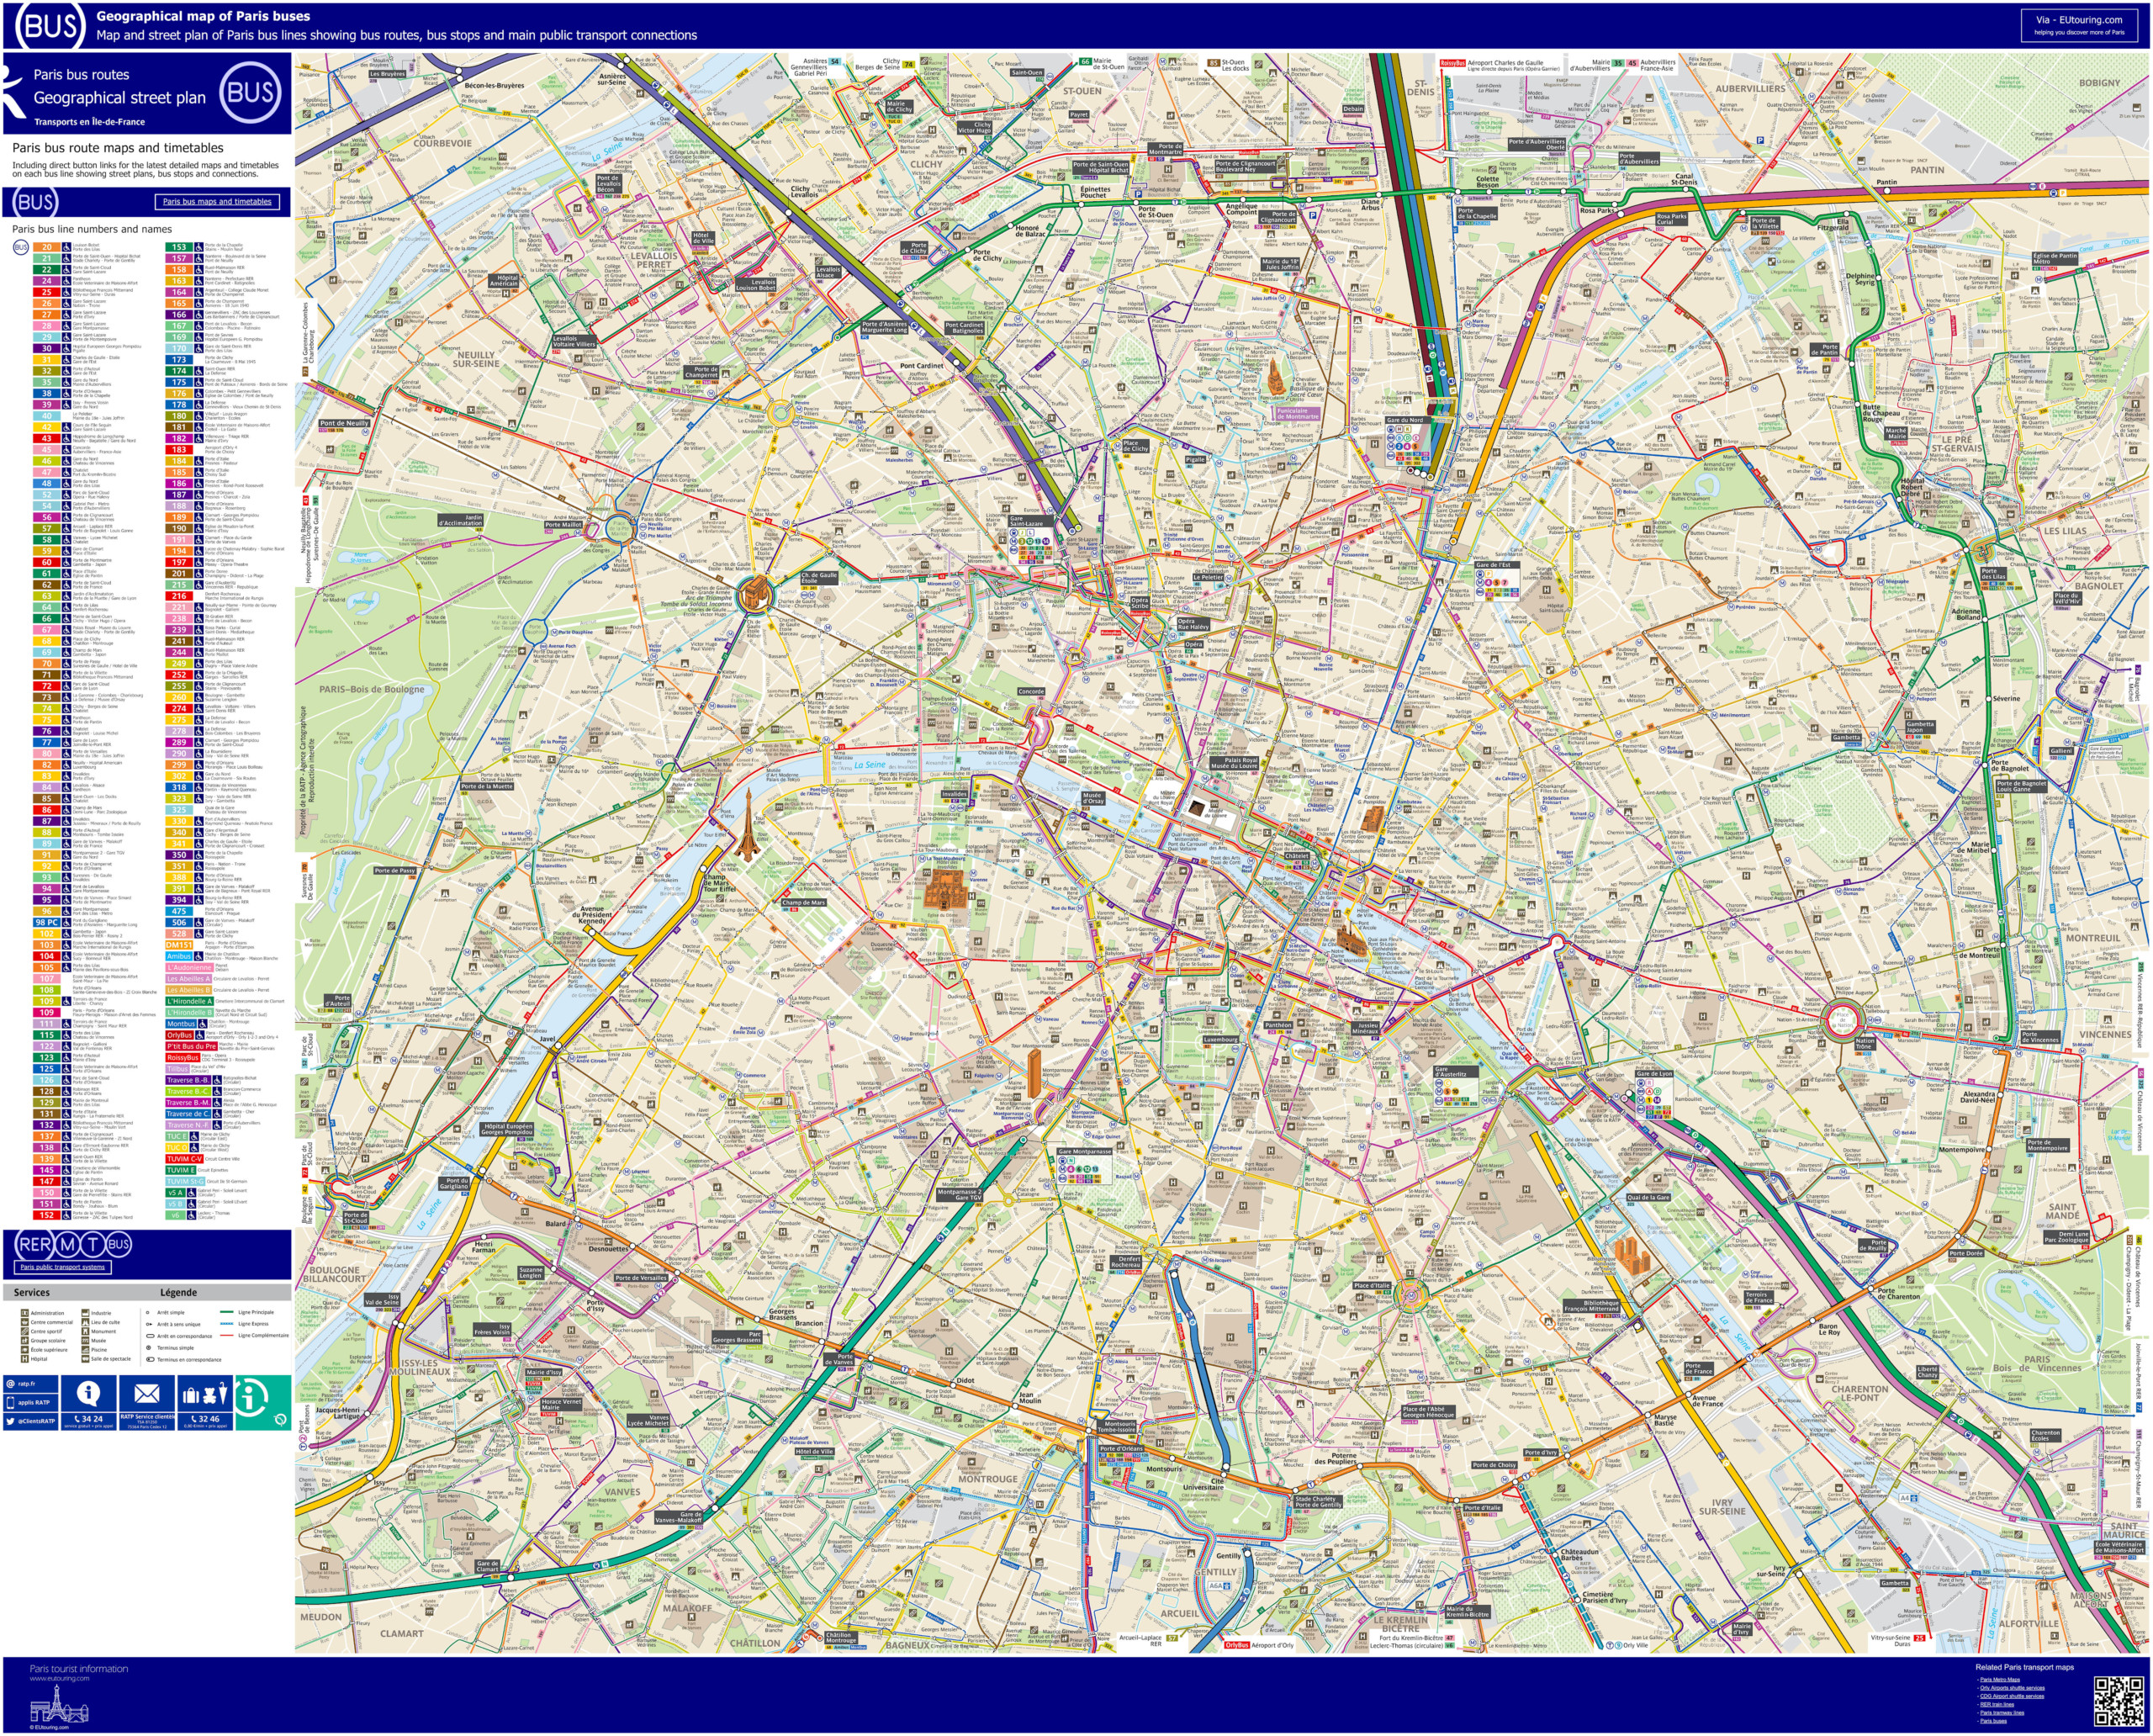 Paris Bus Route Maps With City Street Plan In PDF Or Image 